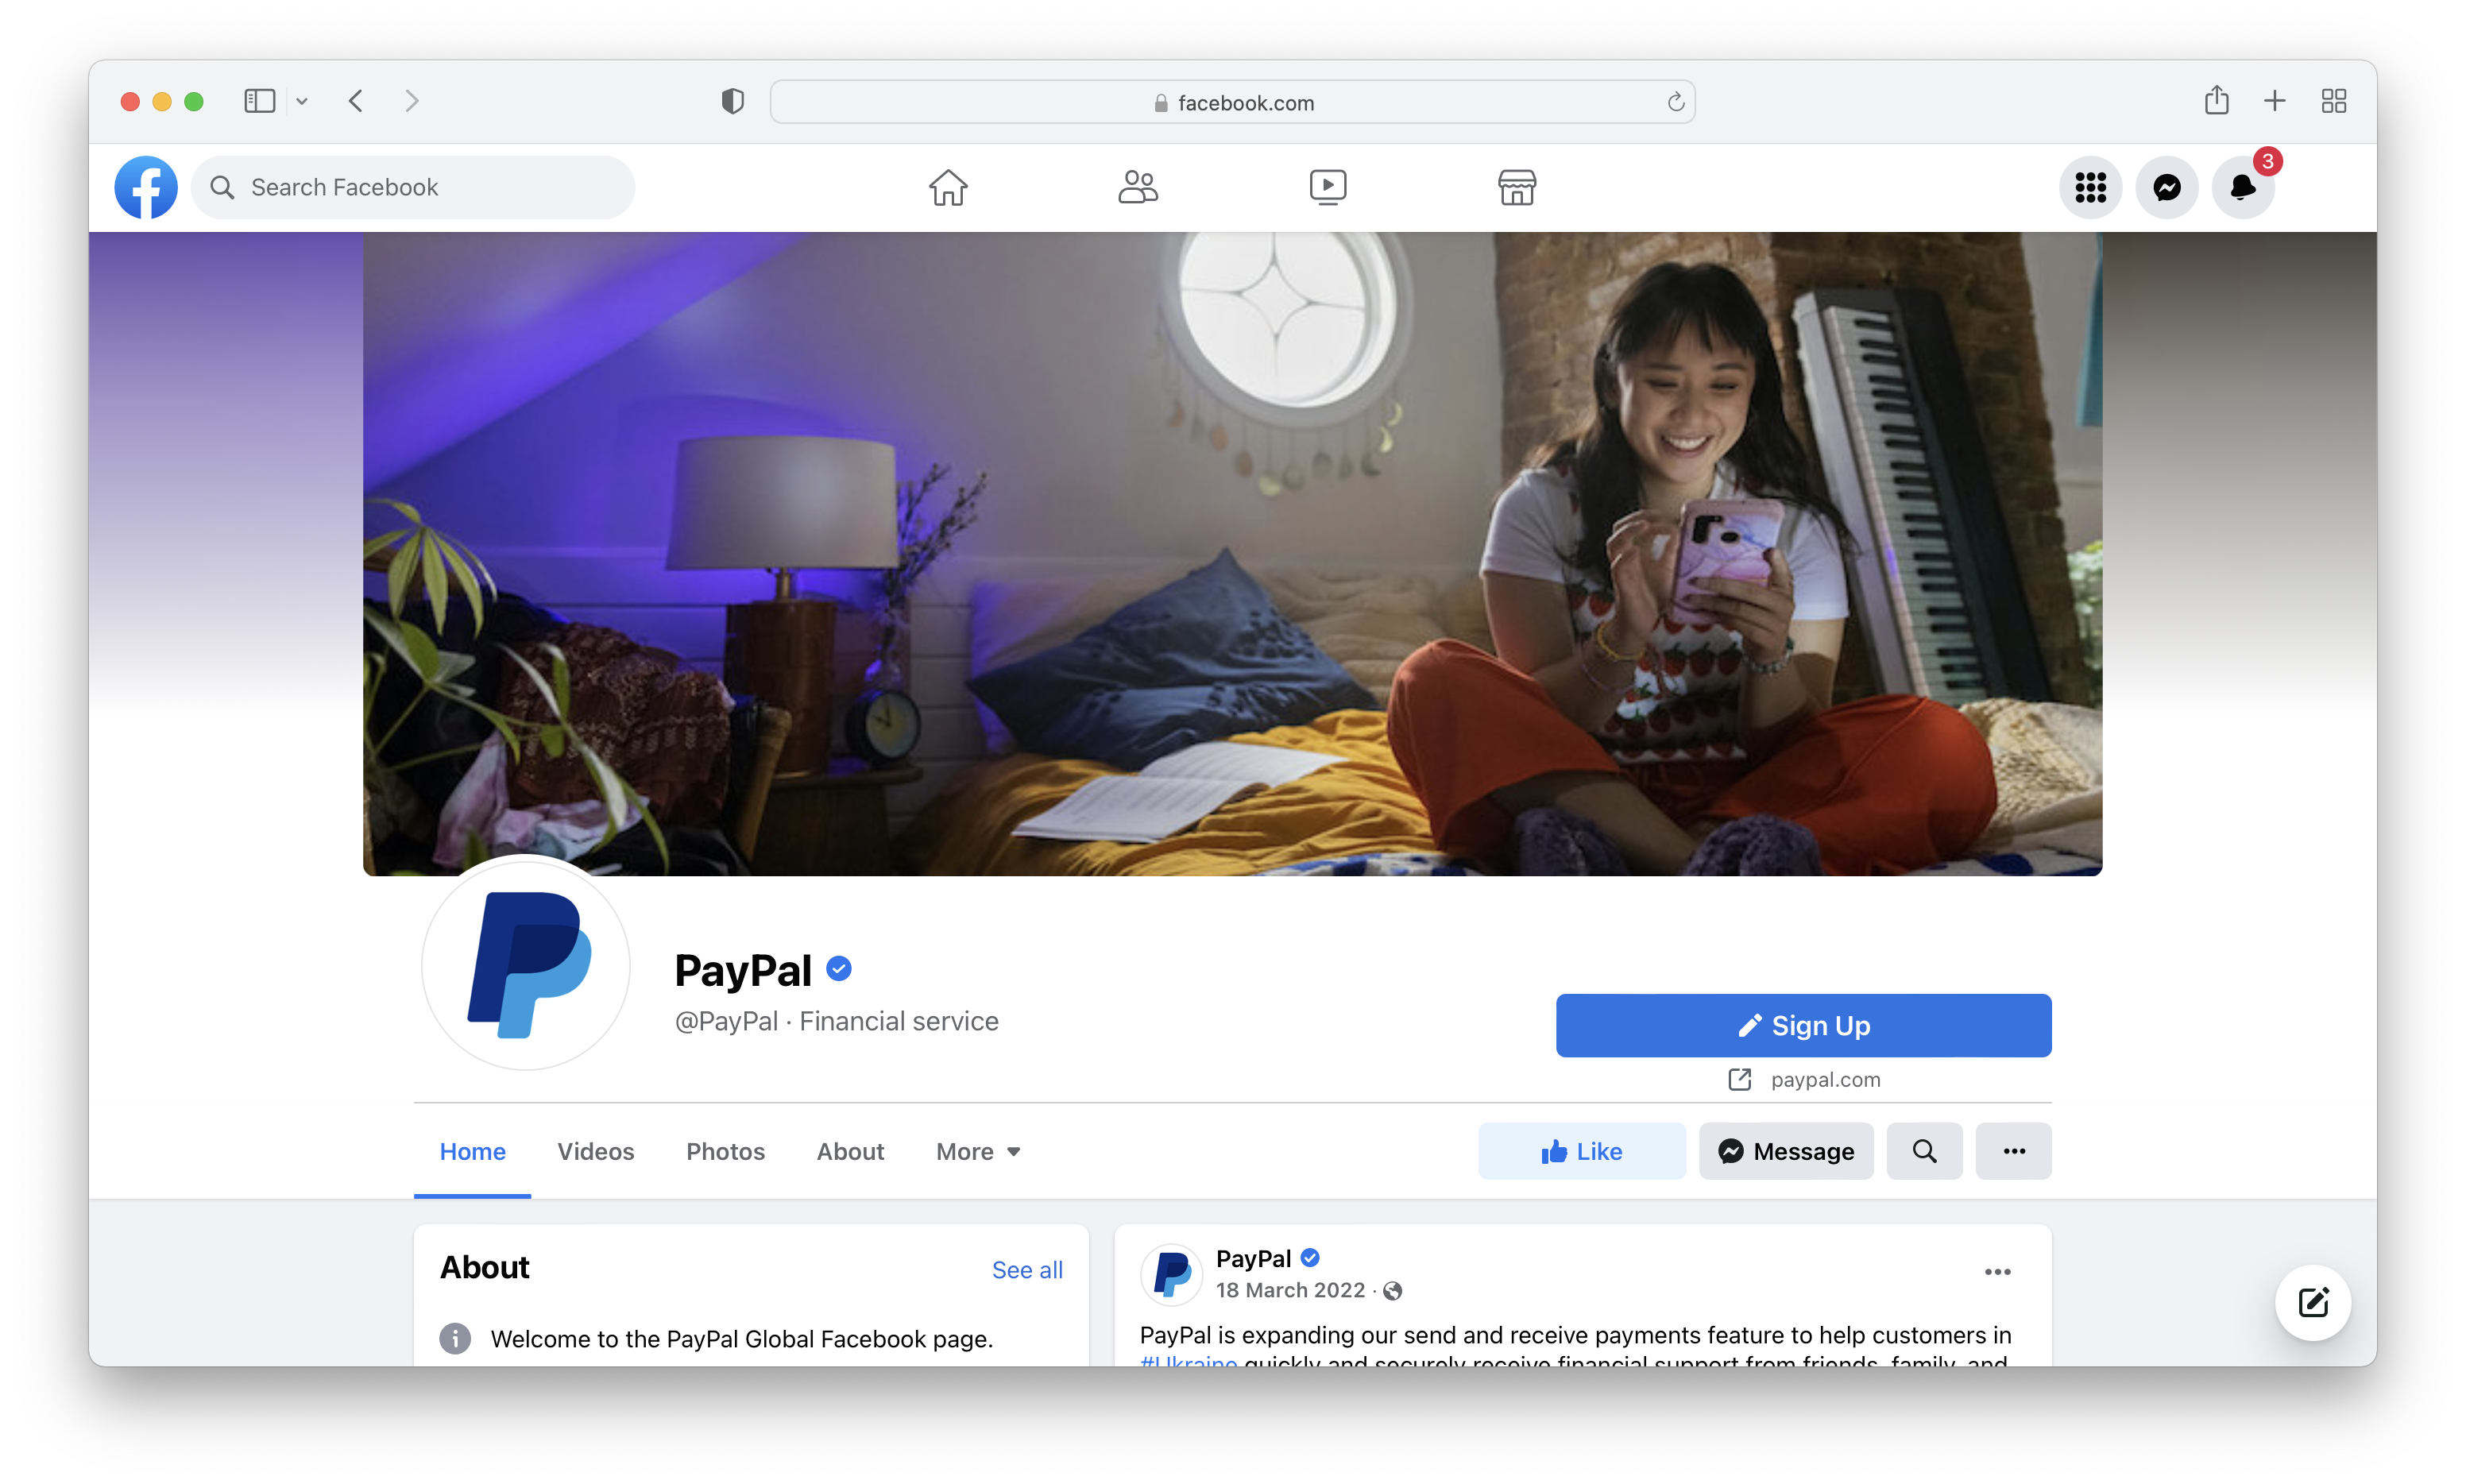 PayPal’s Facebook page